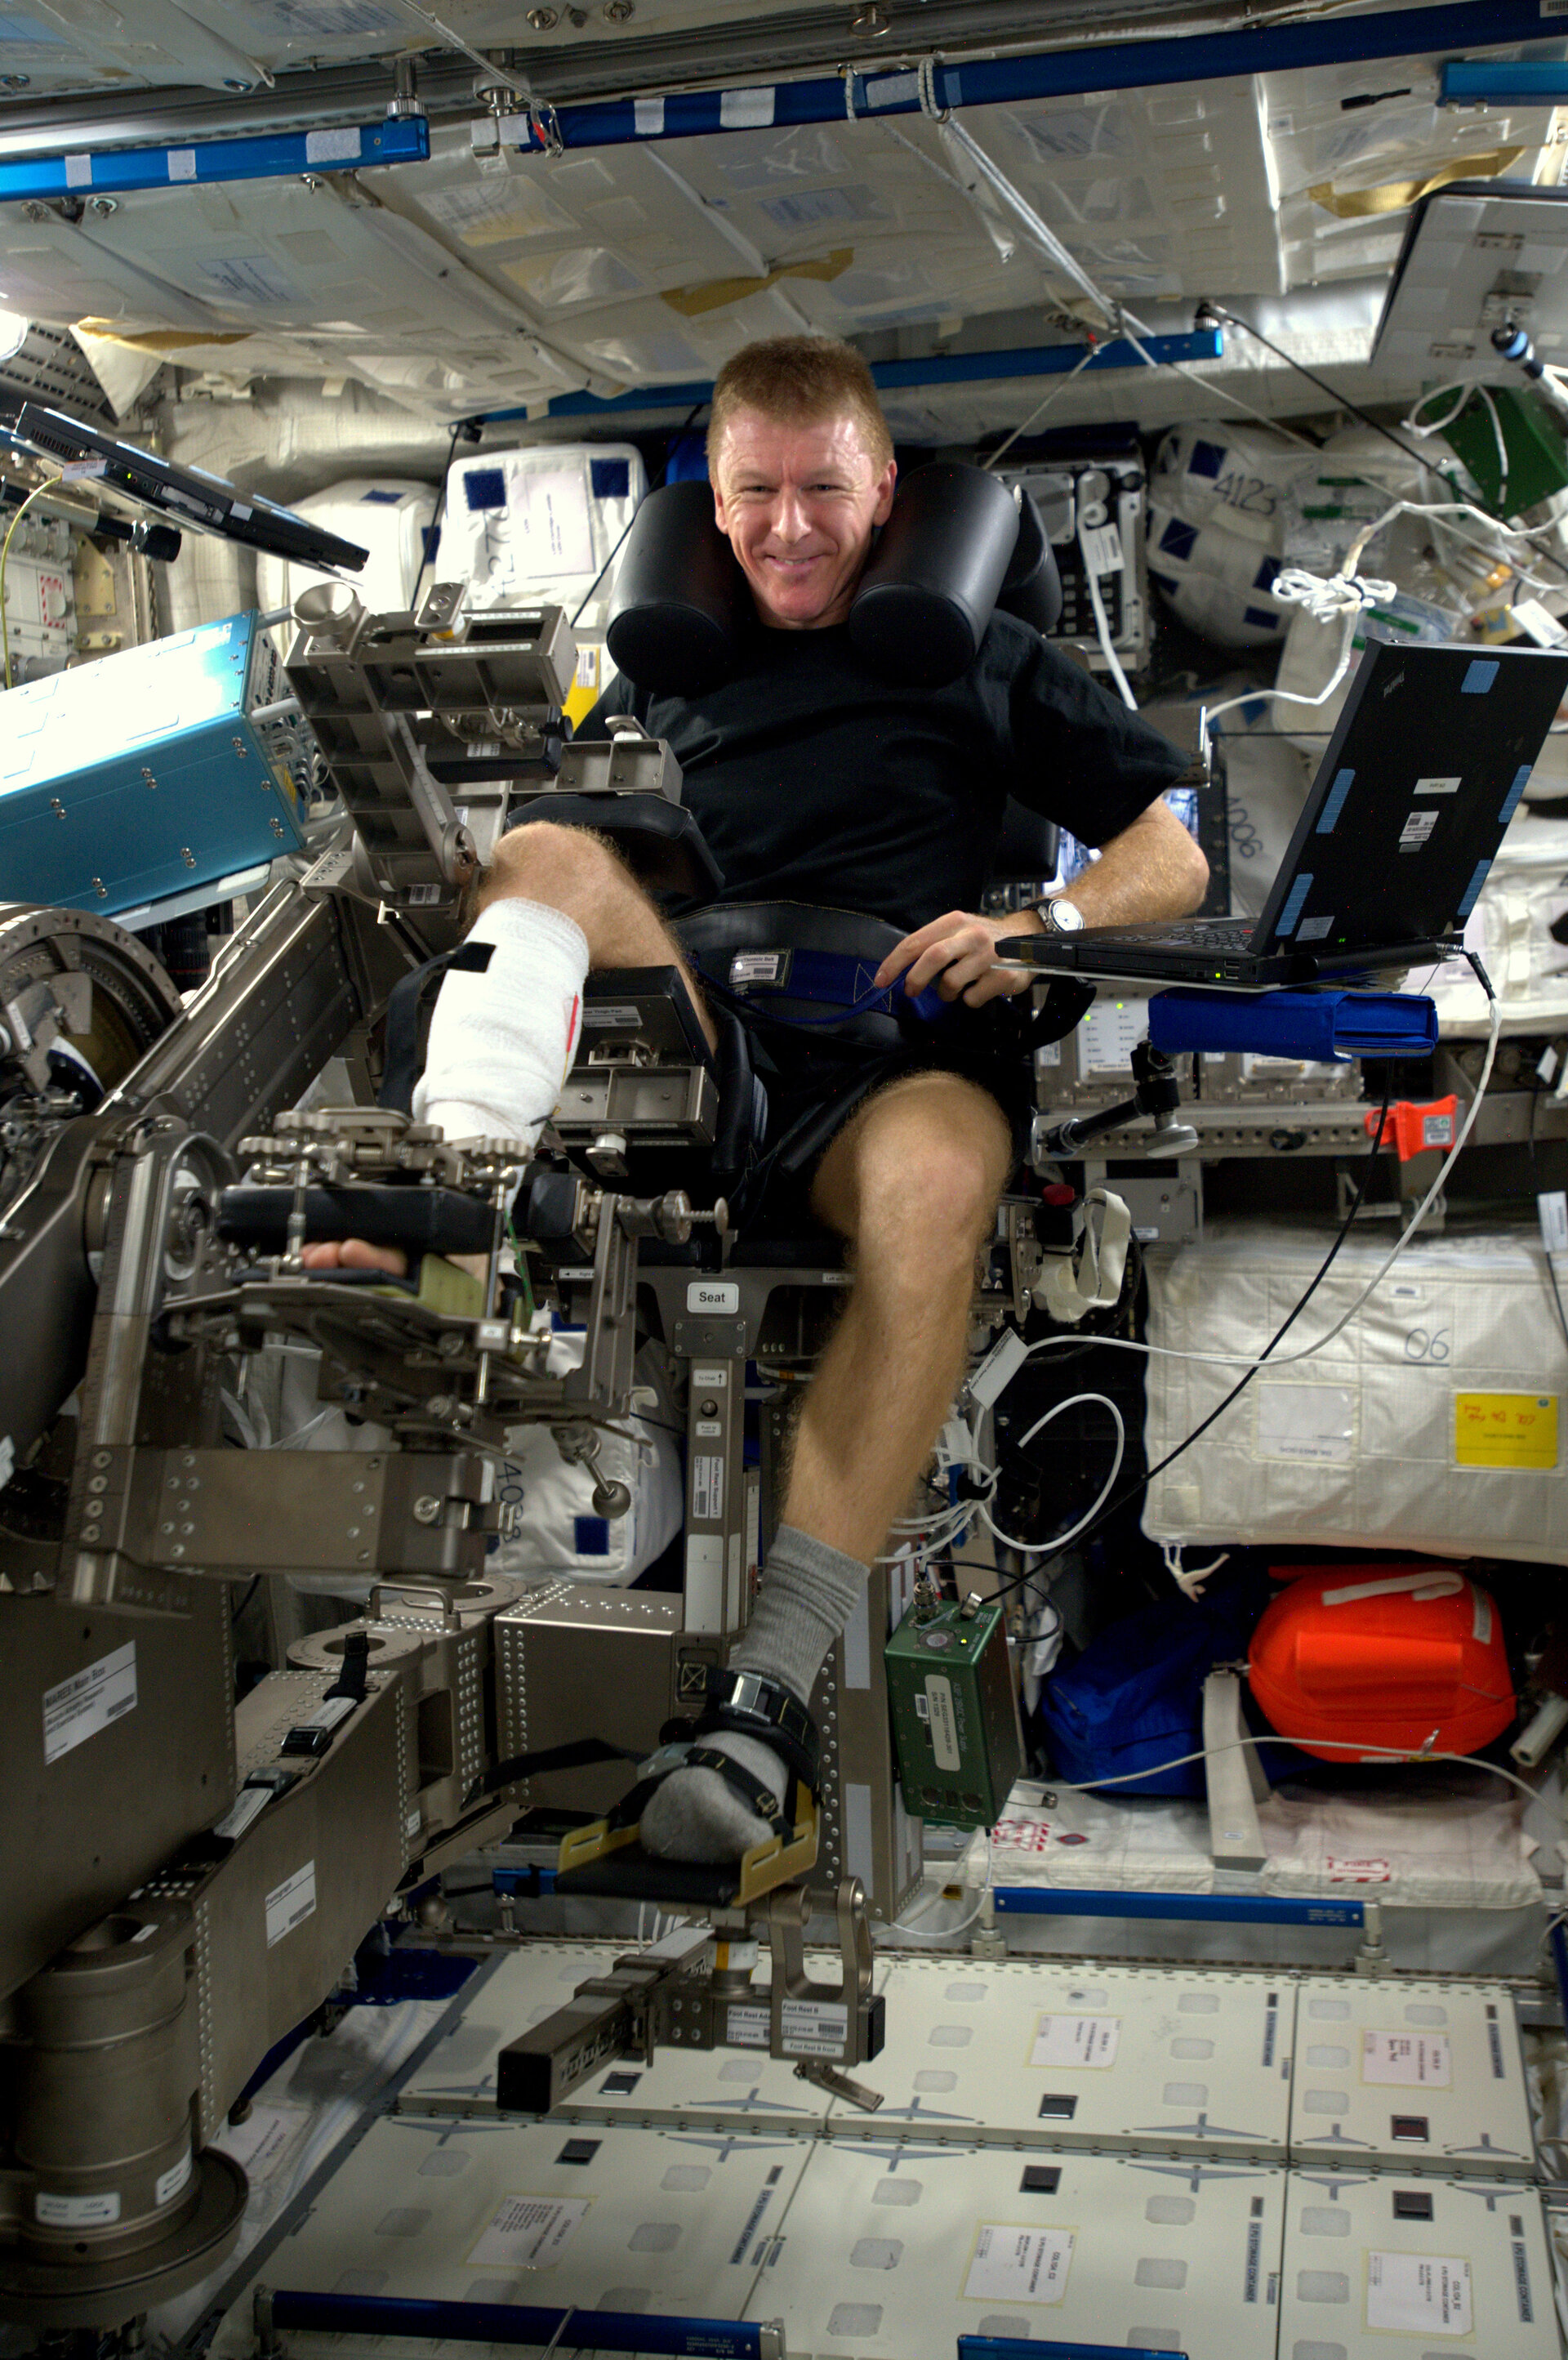 Muscle research in space